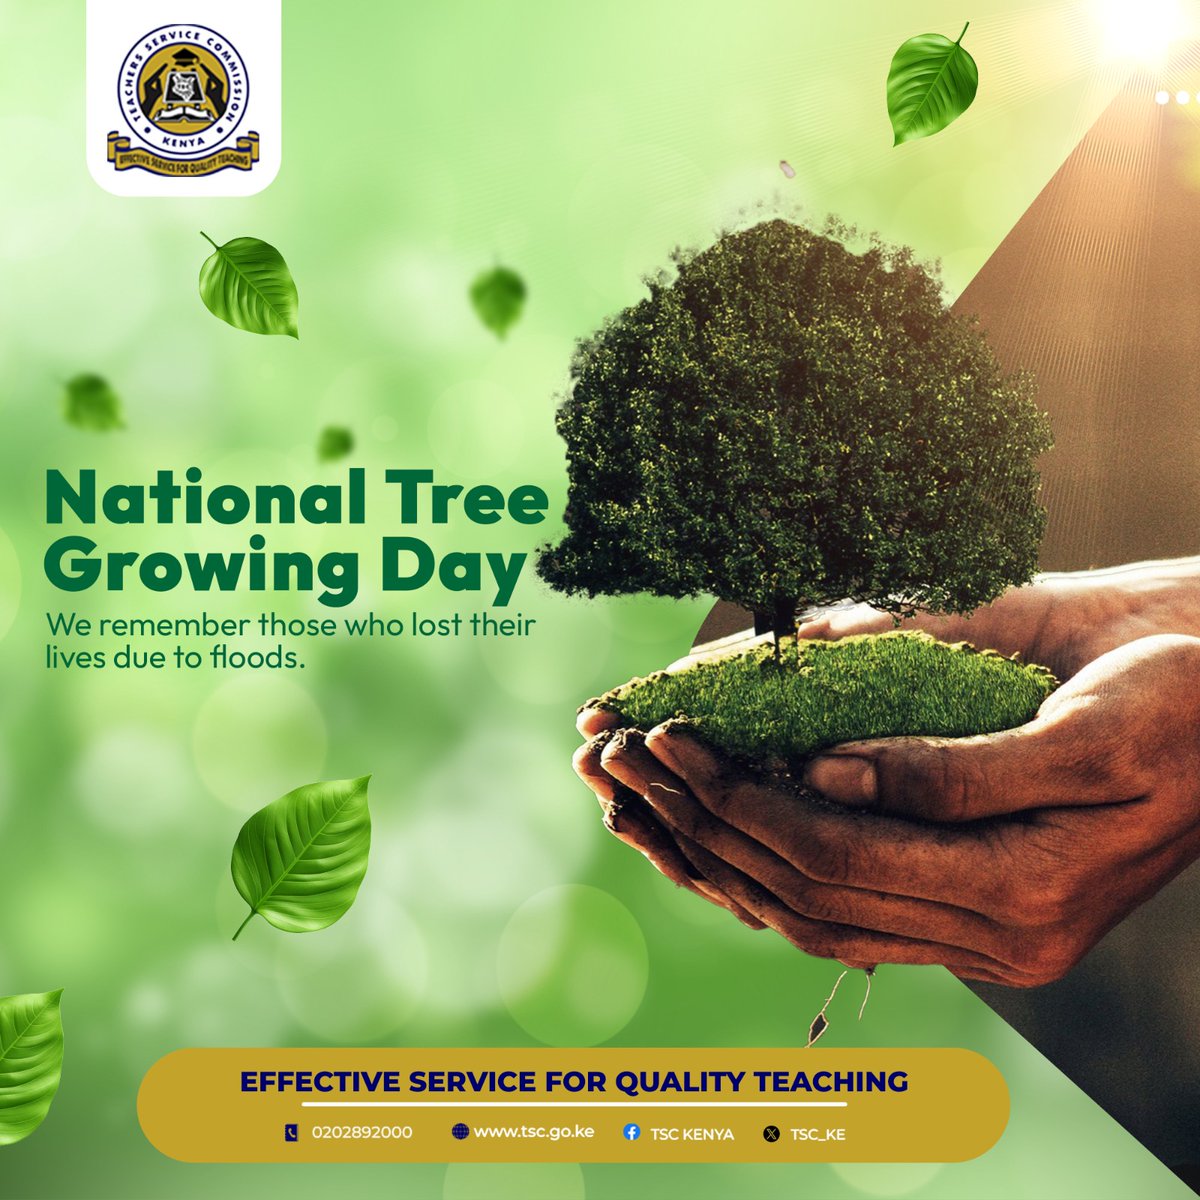 Following the gazettement of Friday 10th May 2024 as the National Tree Growing Day in honour of flood victims, all Commission employees are encouraged to join in the efforts of growing trees. We remember those who lost their lives due to floods.